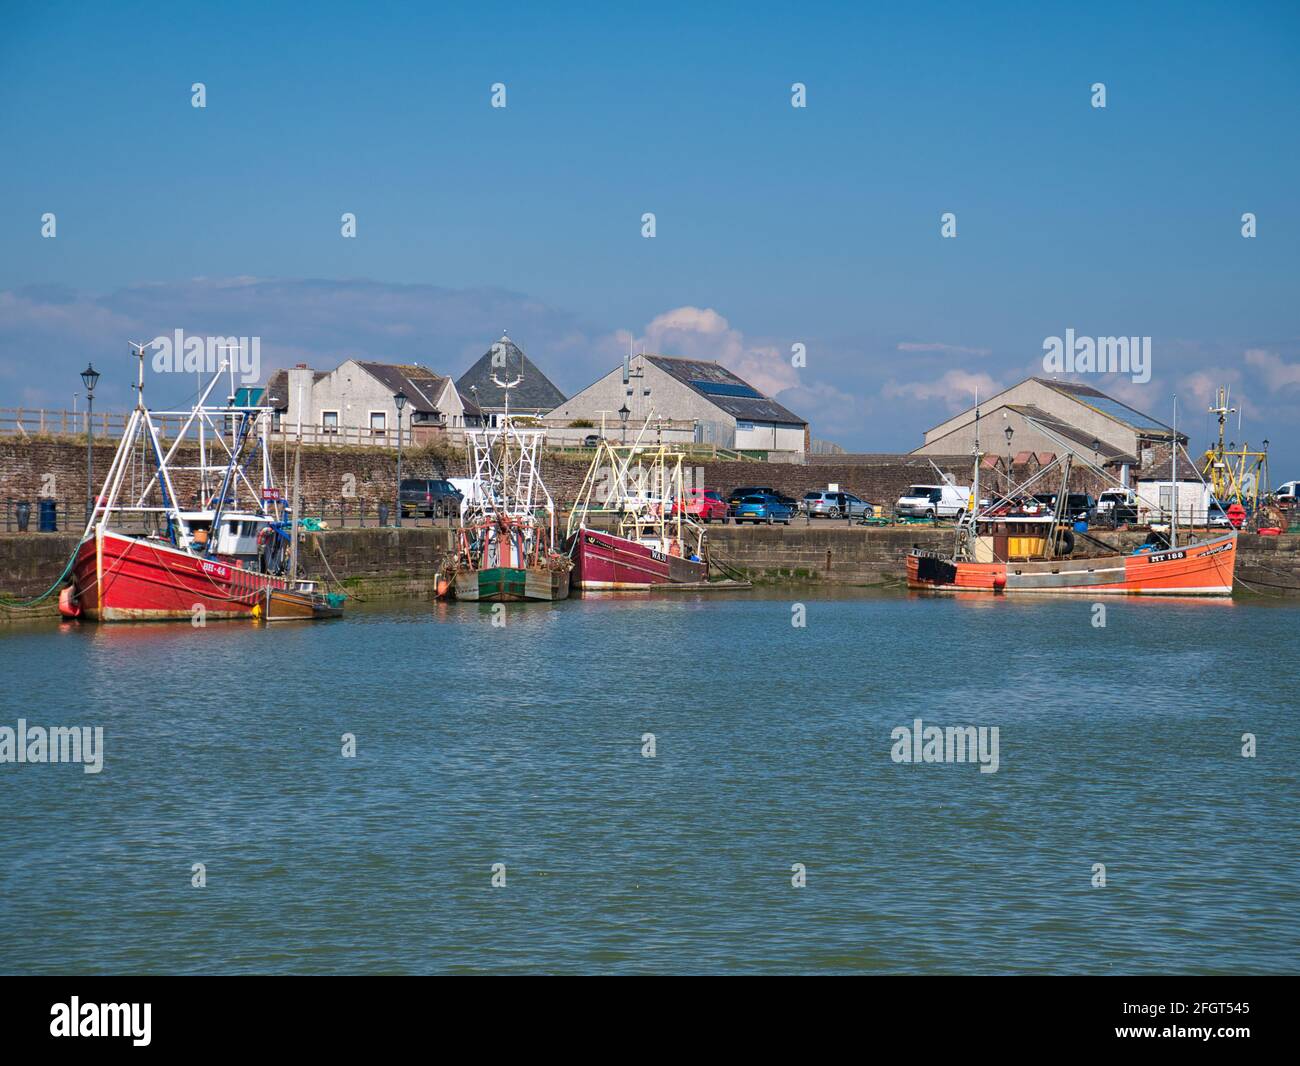 Fishing boats moored at Maryport on the Solway Coast in Cumbria, UK. Taken on a sunny day in spring. Stock Photo